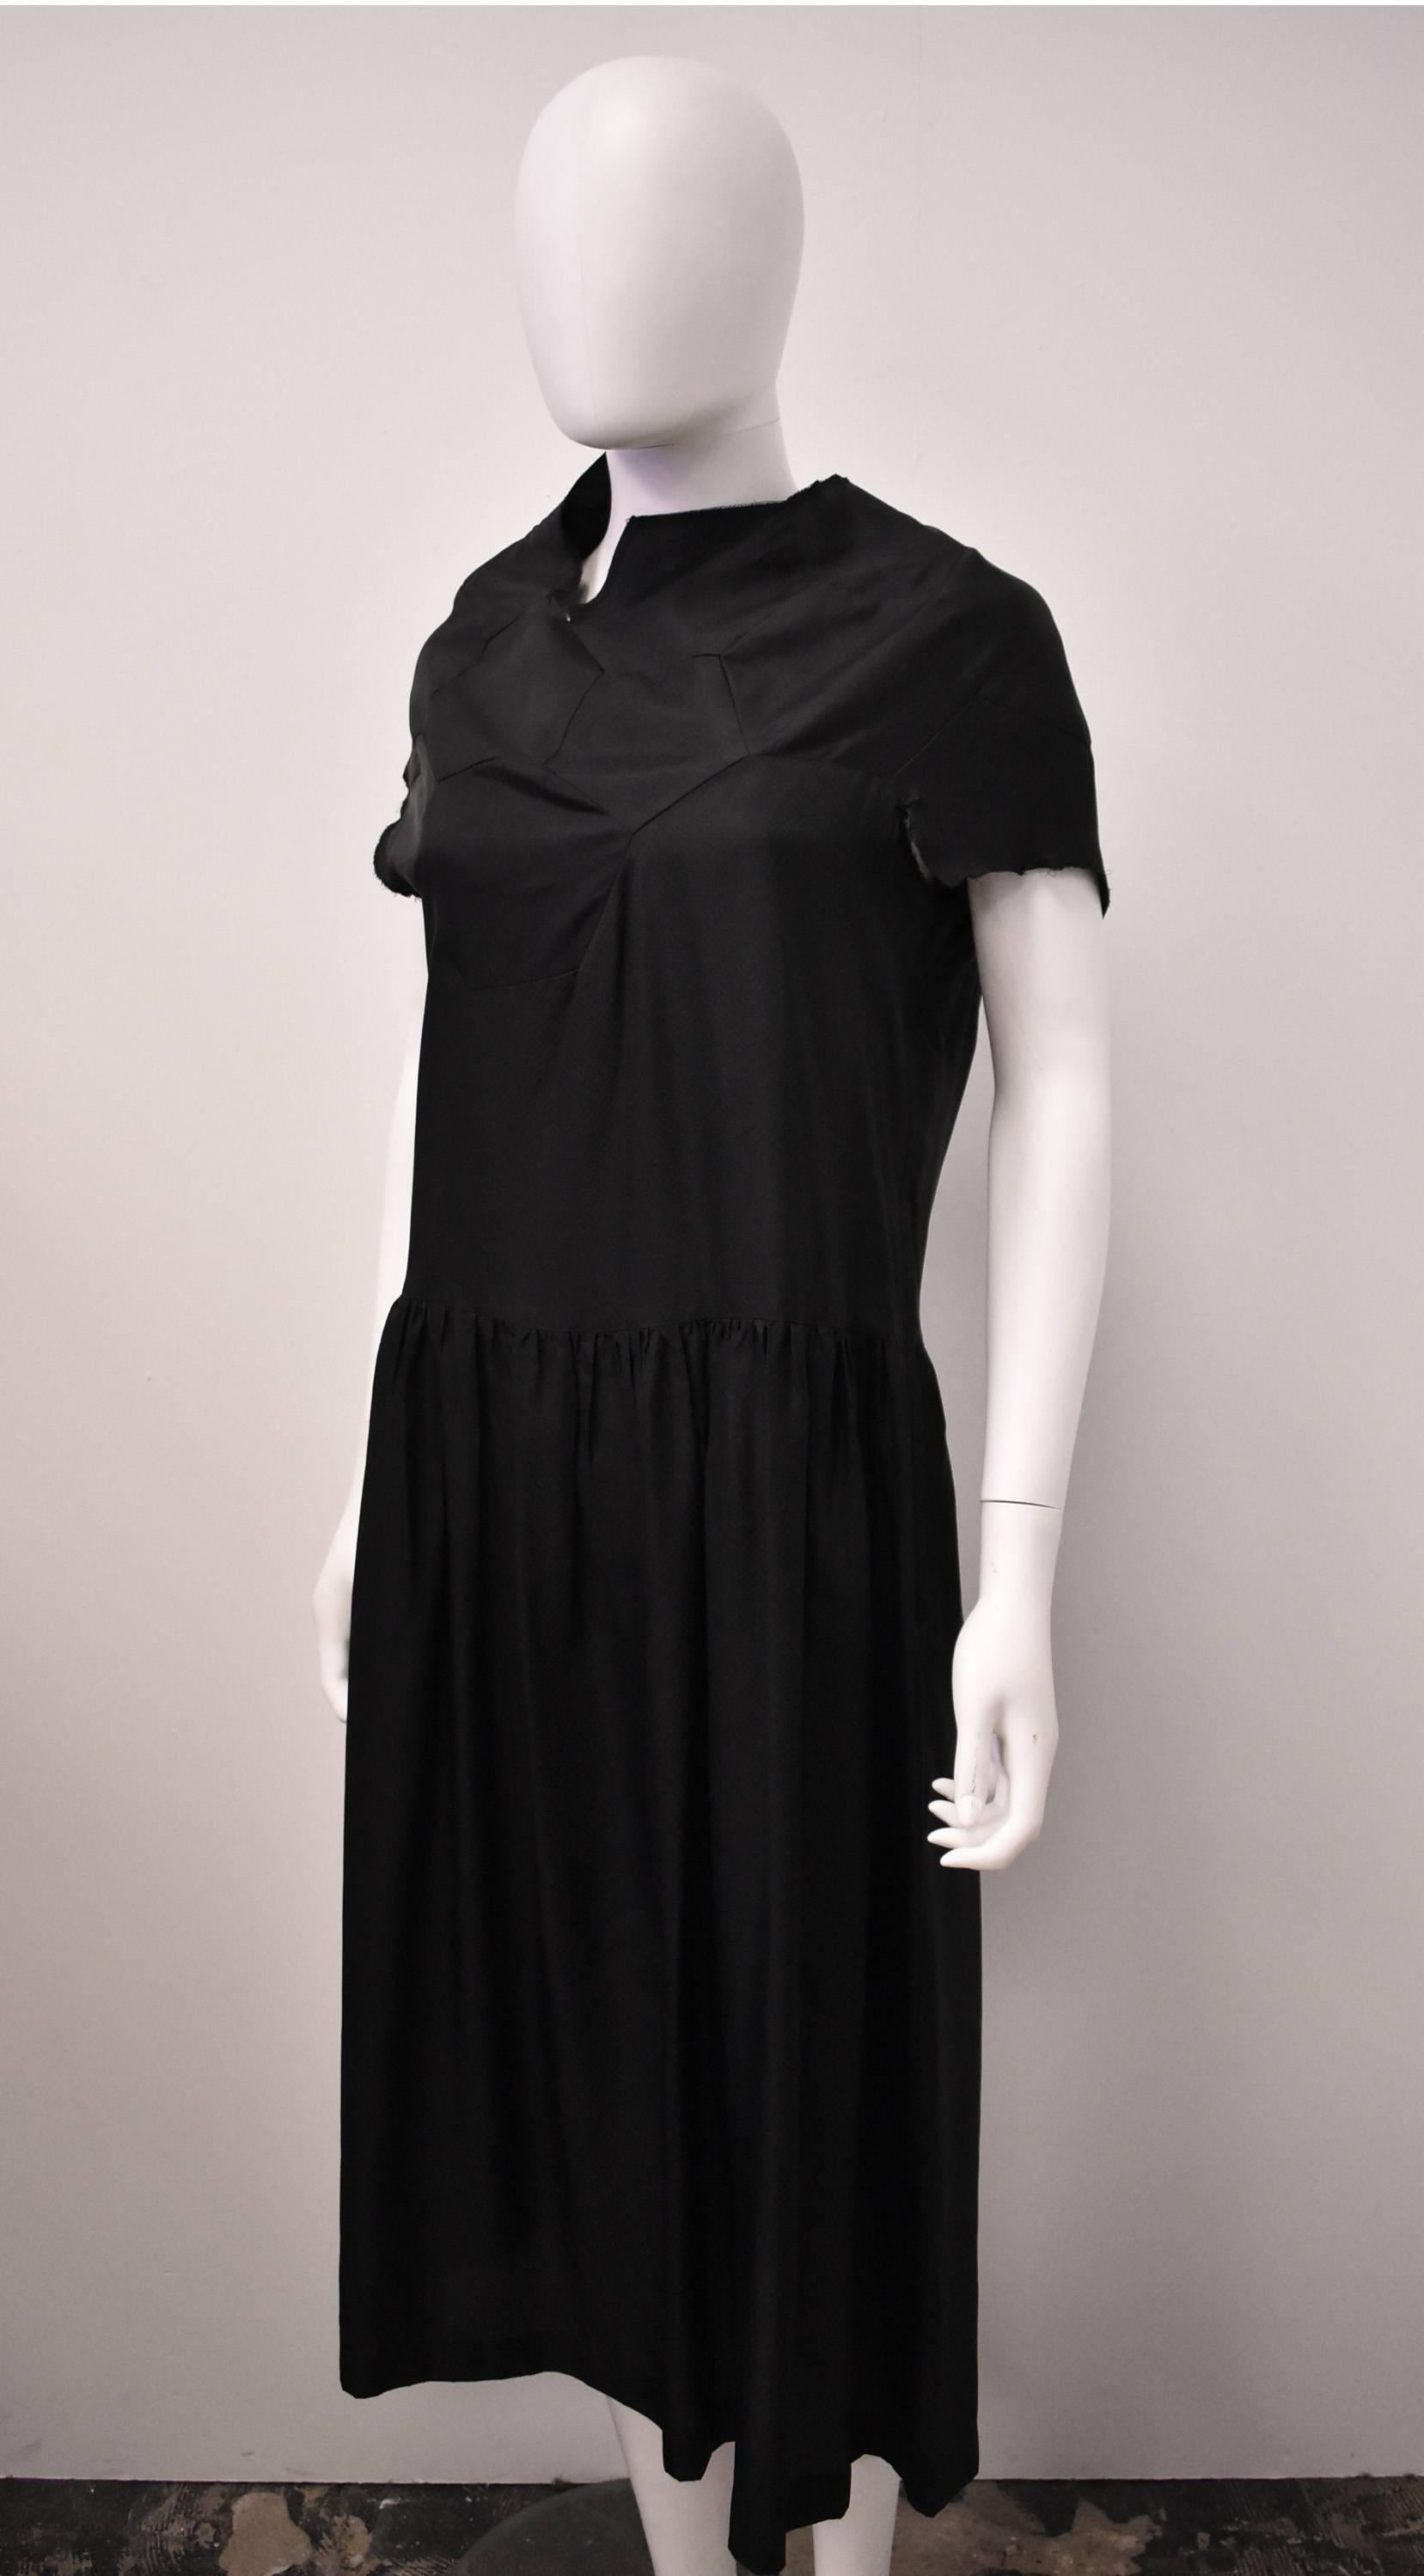 A black calf length dress from Comme des Garcons’ 2008 collection. The dress has a simple shape with a cap sleeves, straight shape, dropped waist and slight gathering at the skirt. However, as is to be expected from Comme des Garcons, there is a